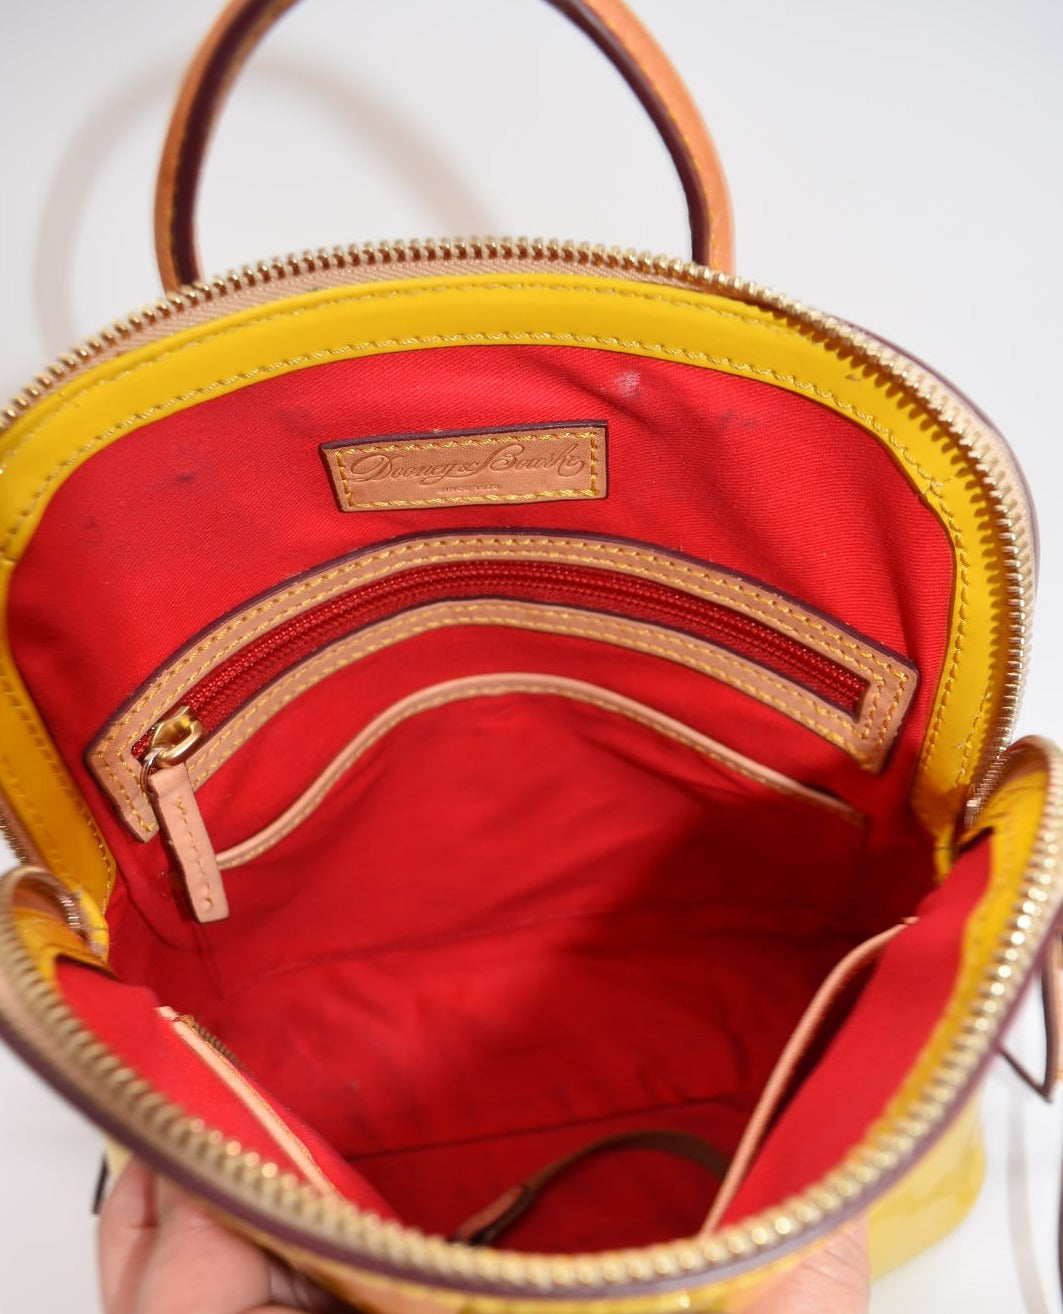 Dooney & Bourke Patent Leather Backpack in Yellow